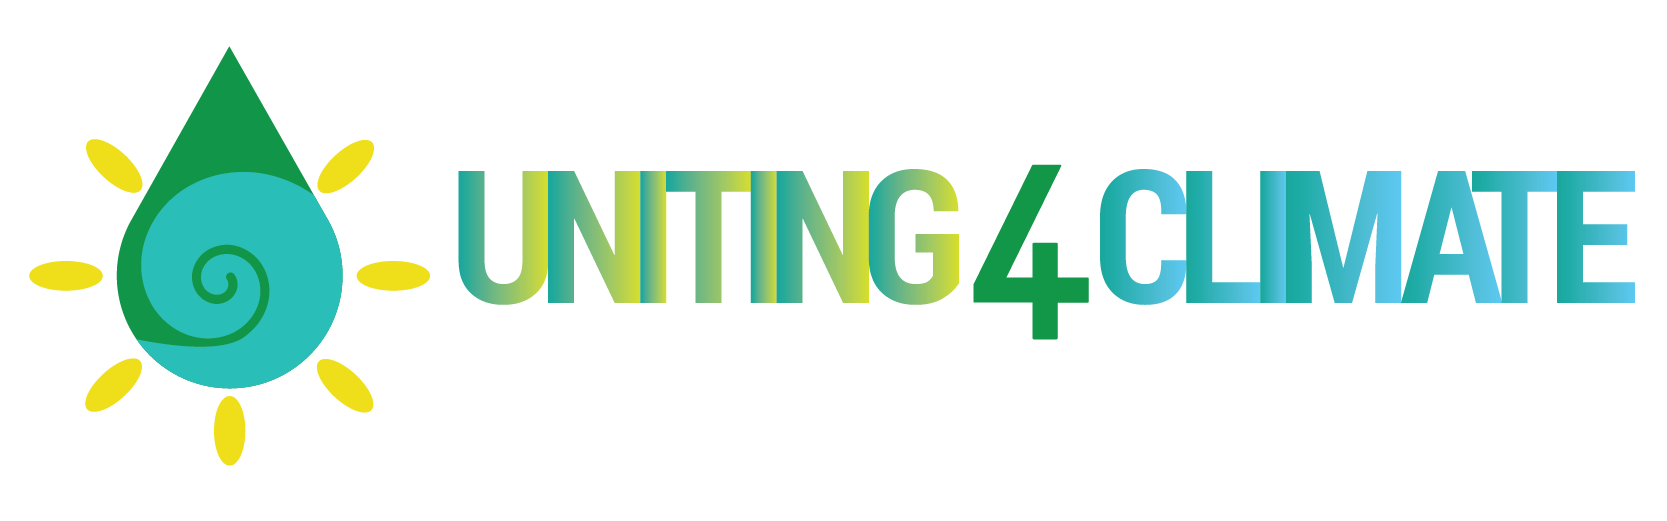 Uniting4Climate Logo - Connect4Climate